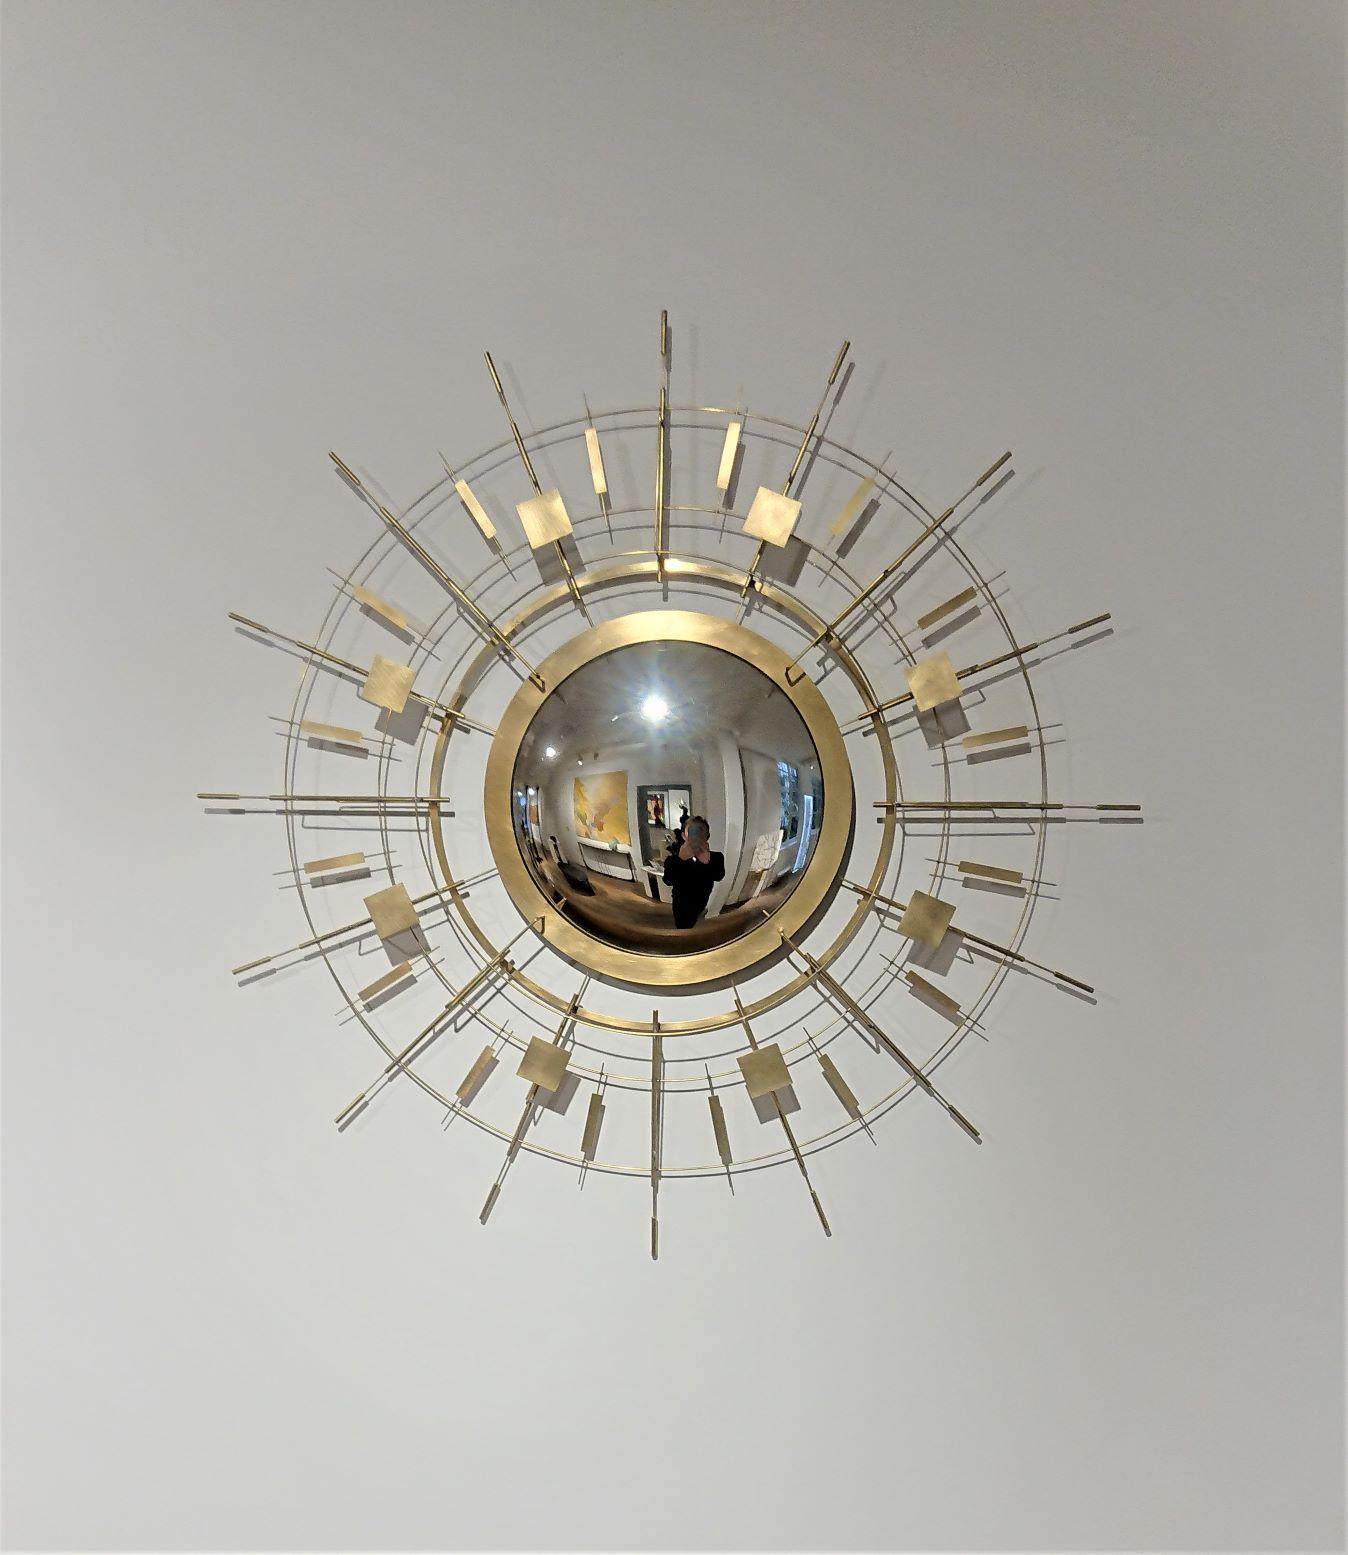 Sunny-Side Two Mirror by Eric de Dormael, Galerie Negropontes in Paris, France

Éric de Dormael is an unconventional artist, his trajectory far from the beaten track. Trained at the Saint-Luc school in Tournai and at the Atelier Met in Penninghen,